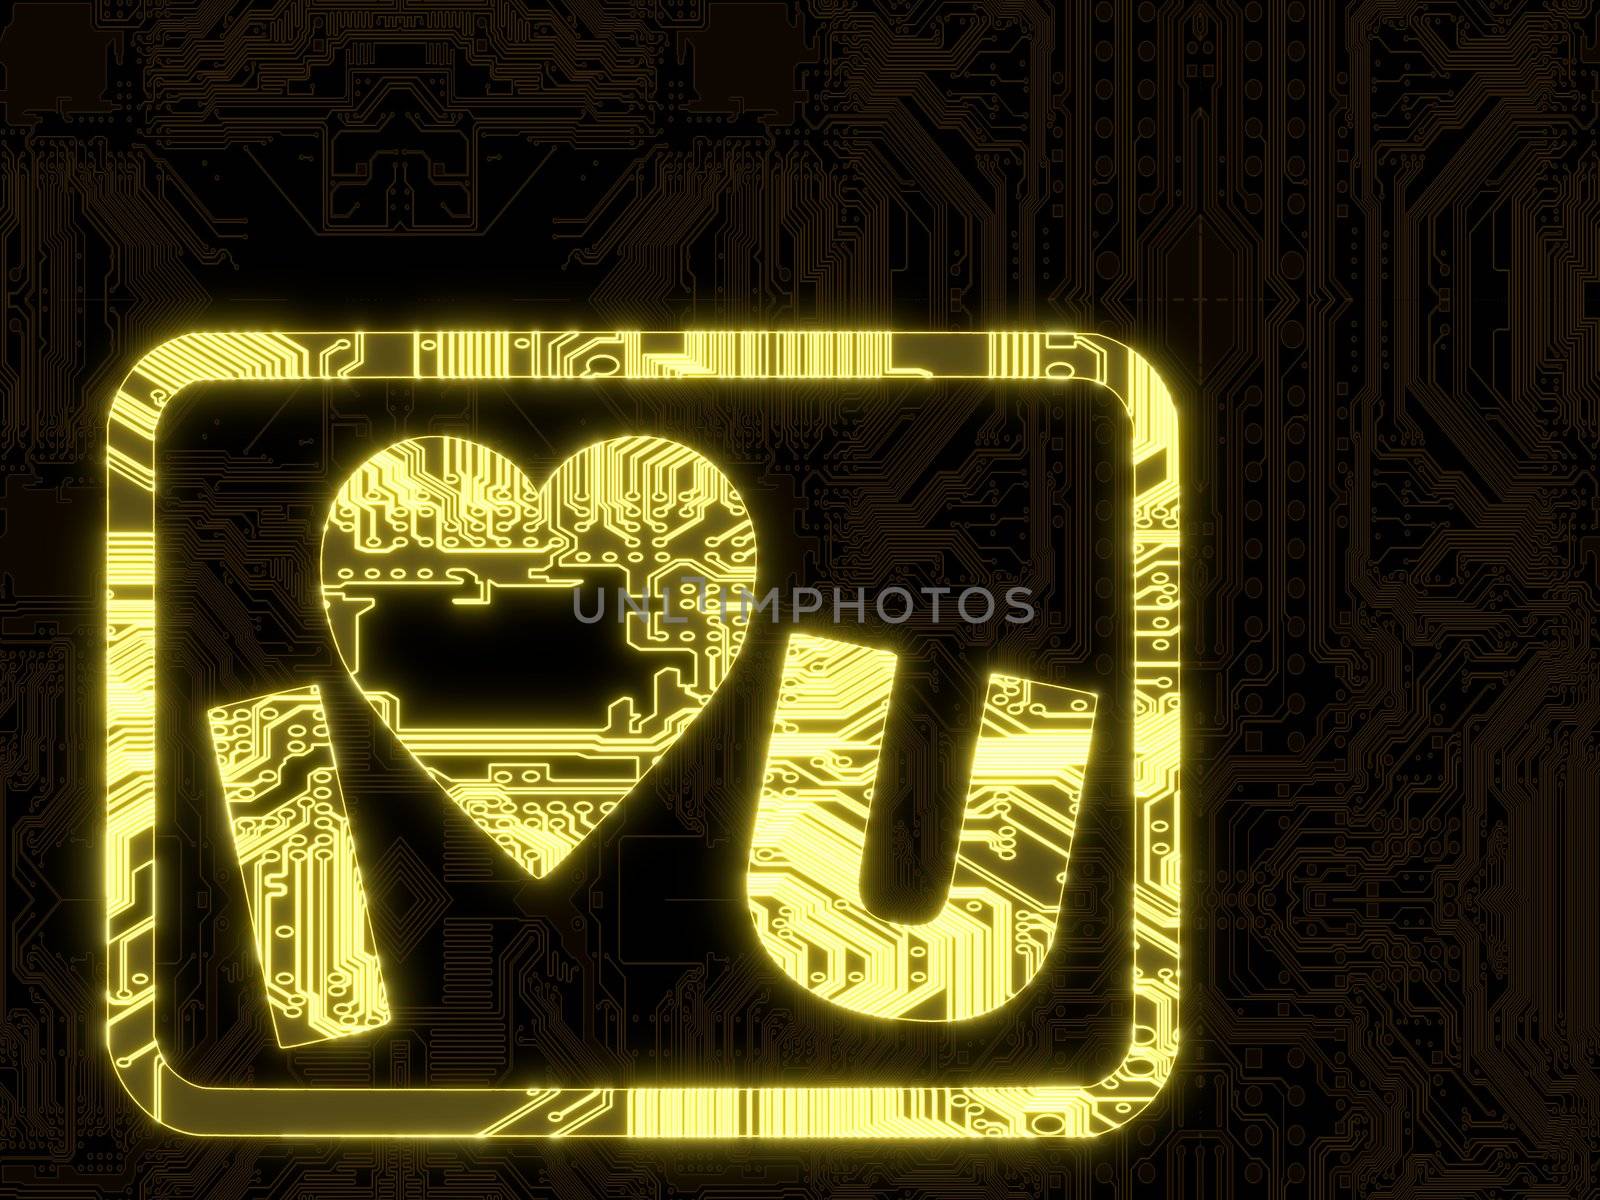 Glowing I love you symbol on a computer chip by onirb